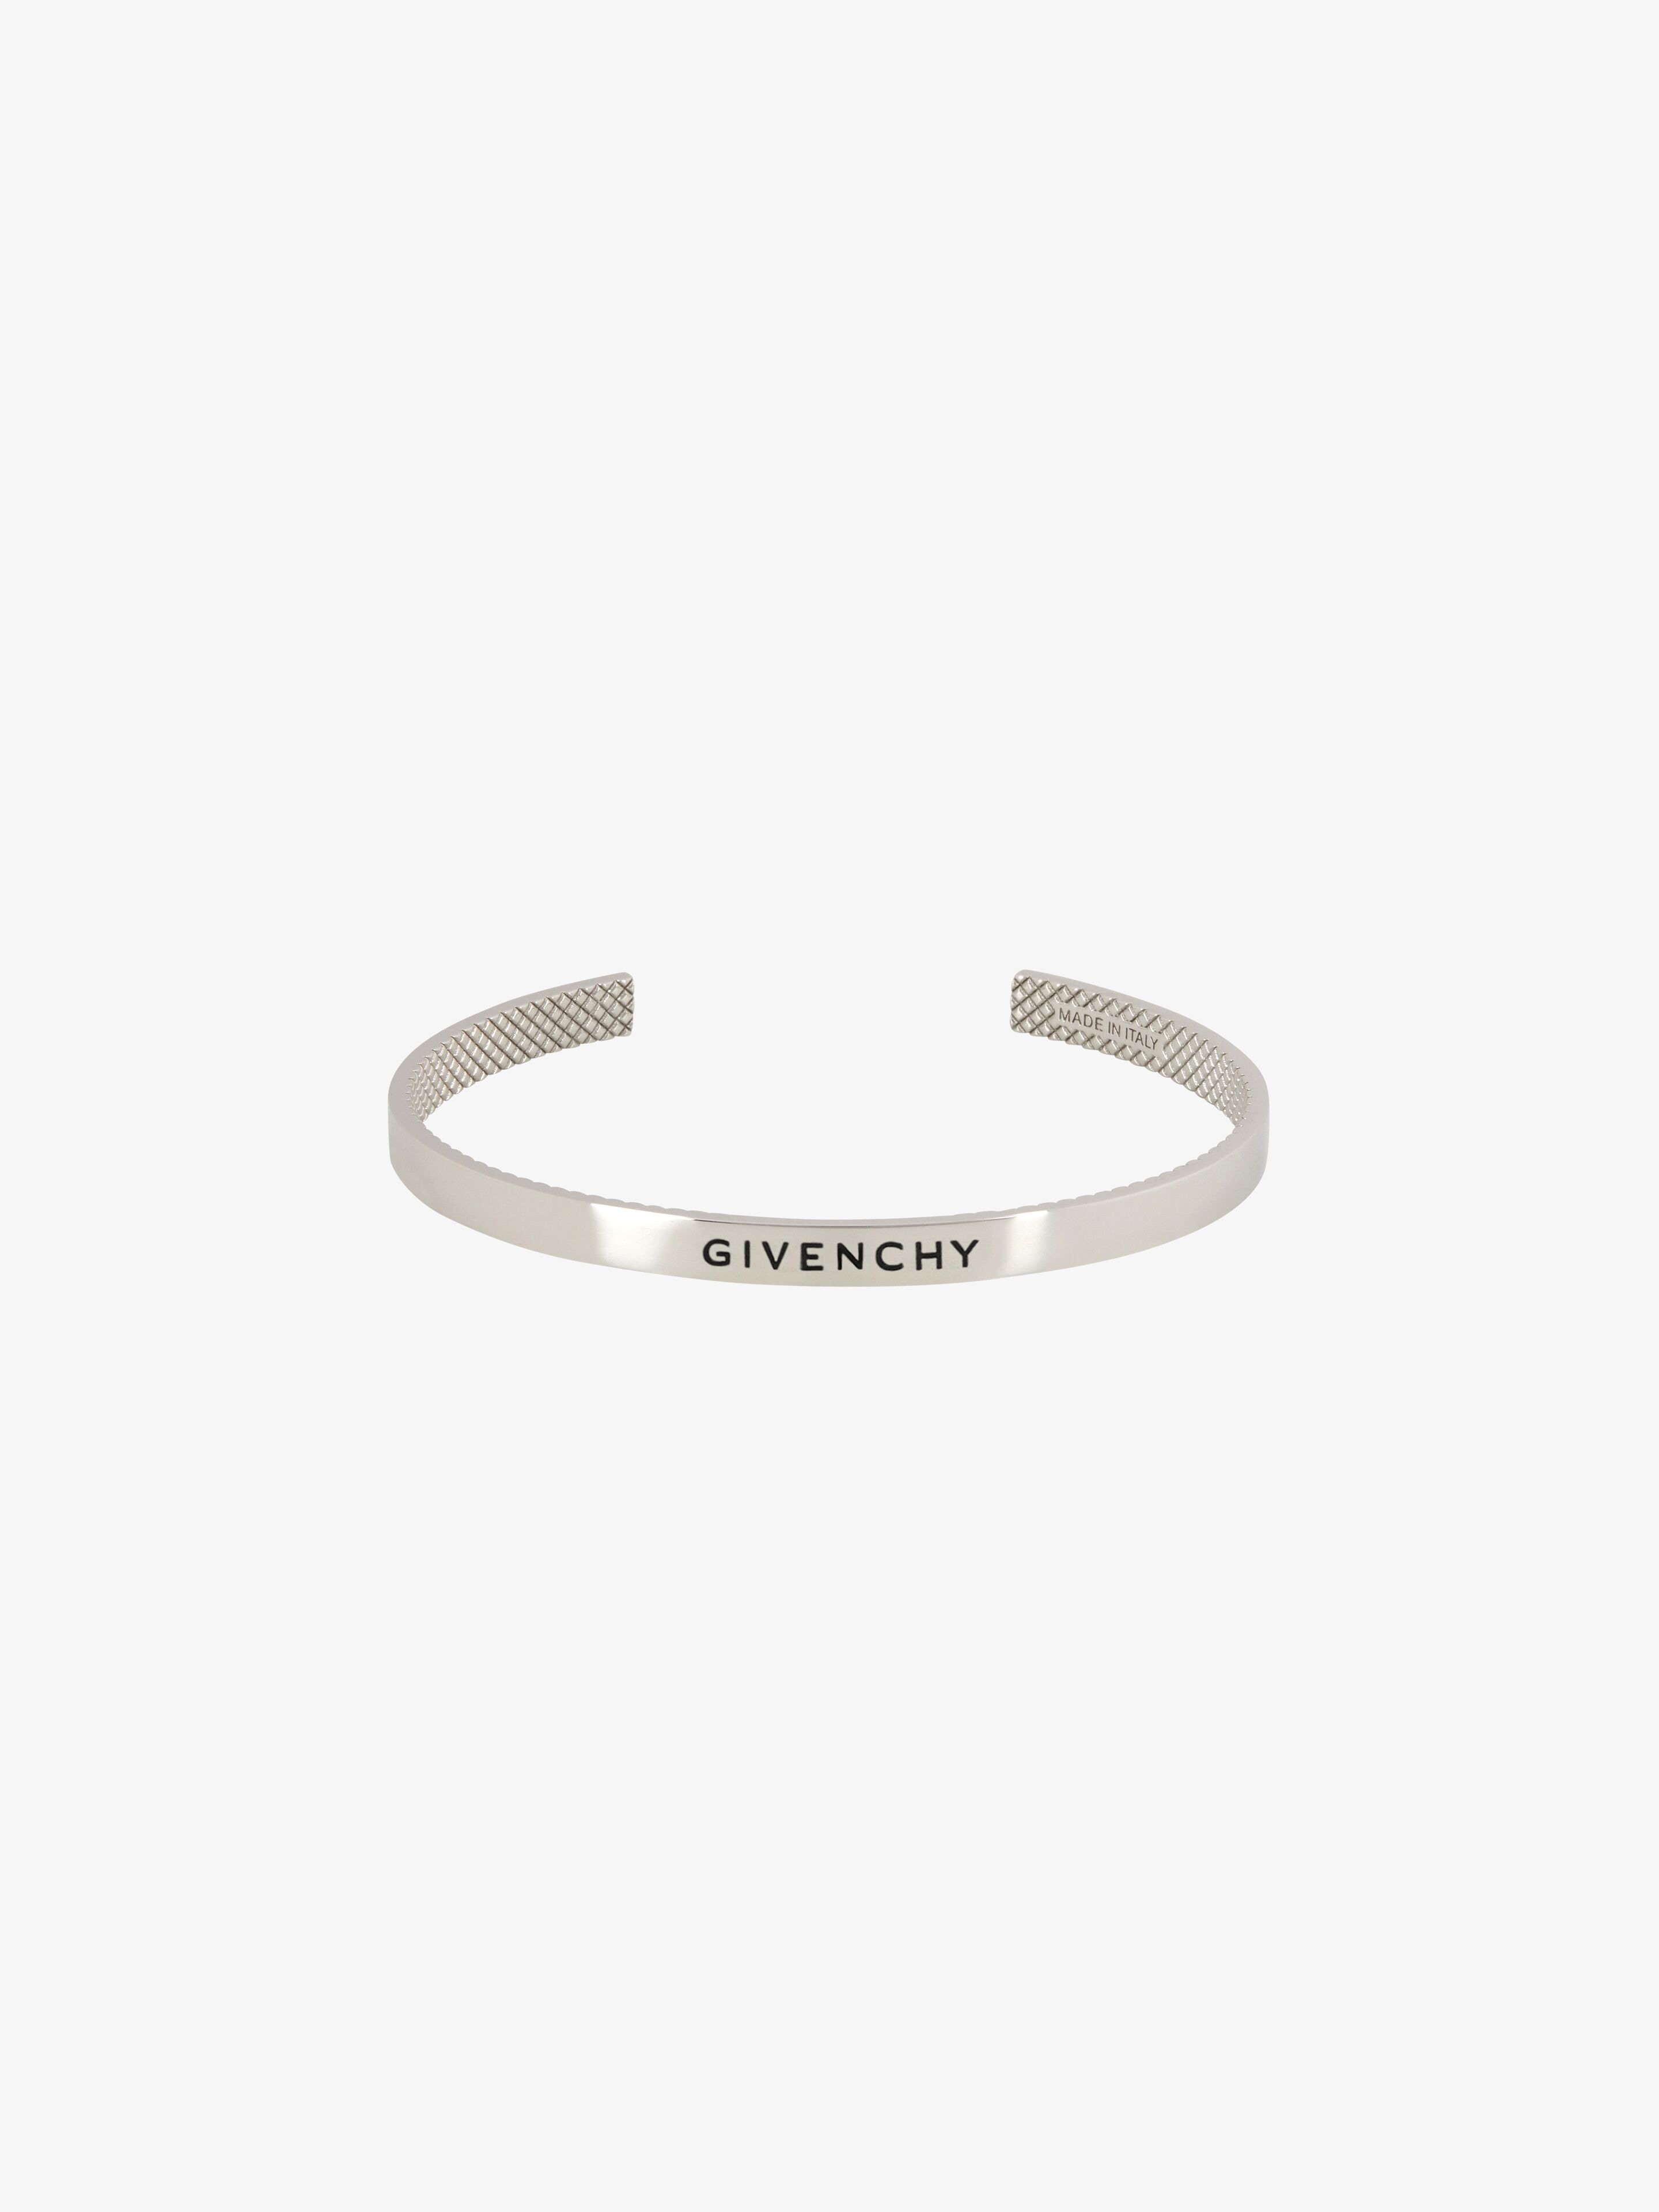 GIVENCHY GIVENCHY CUFF BRACELET IN SILVER METAL